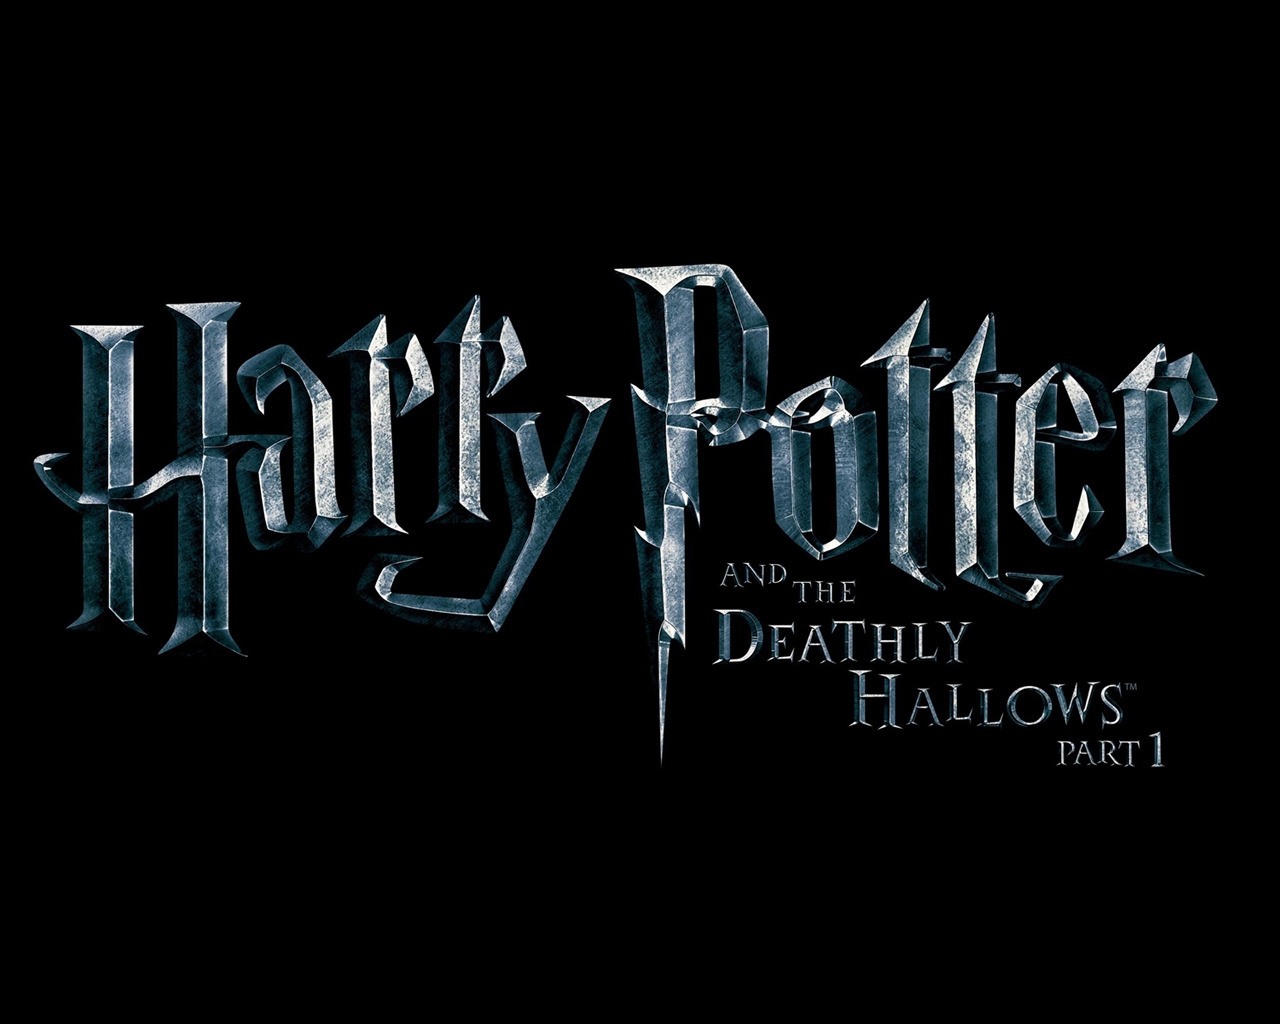 Harry Potter and the Deathly Hallows for 1280 x 1024 resolution